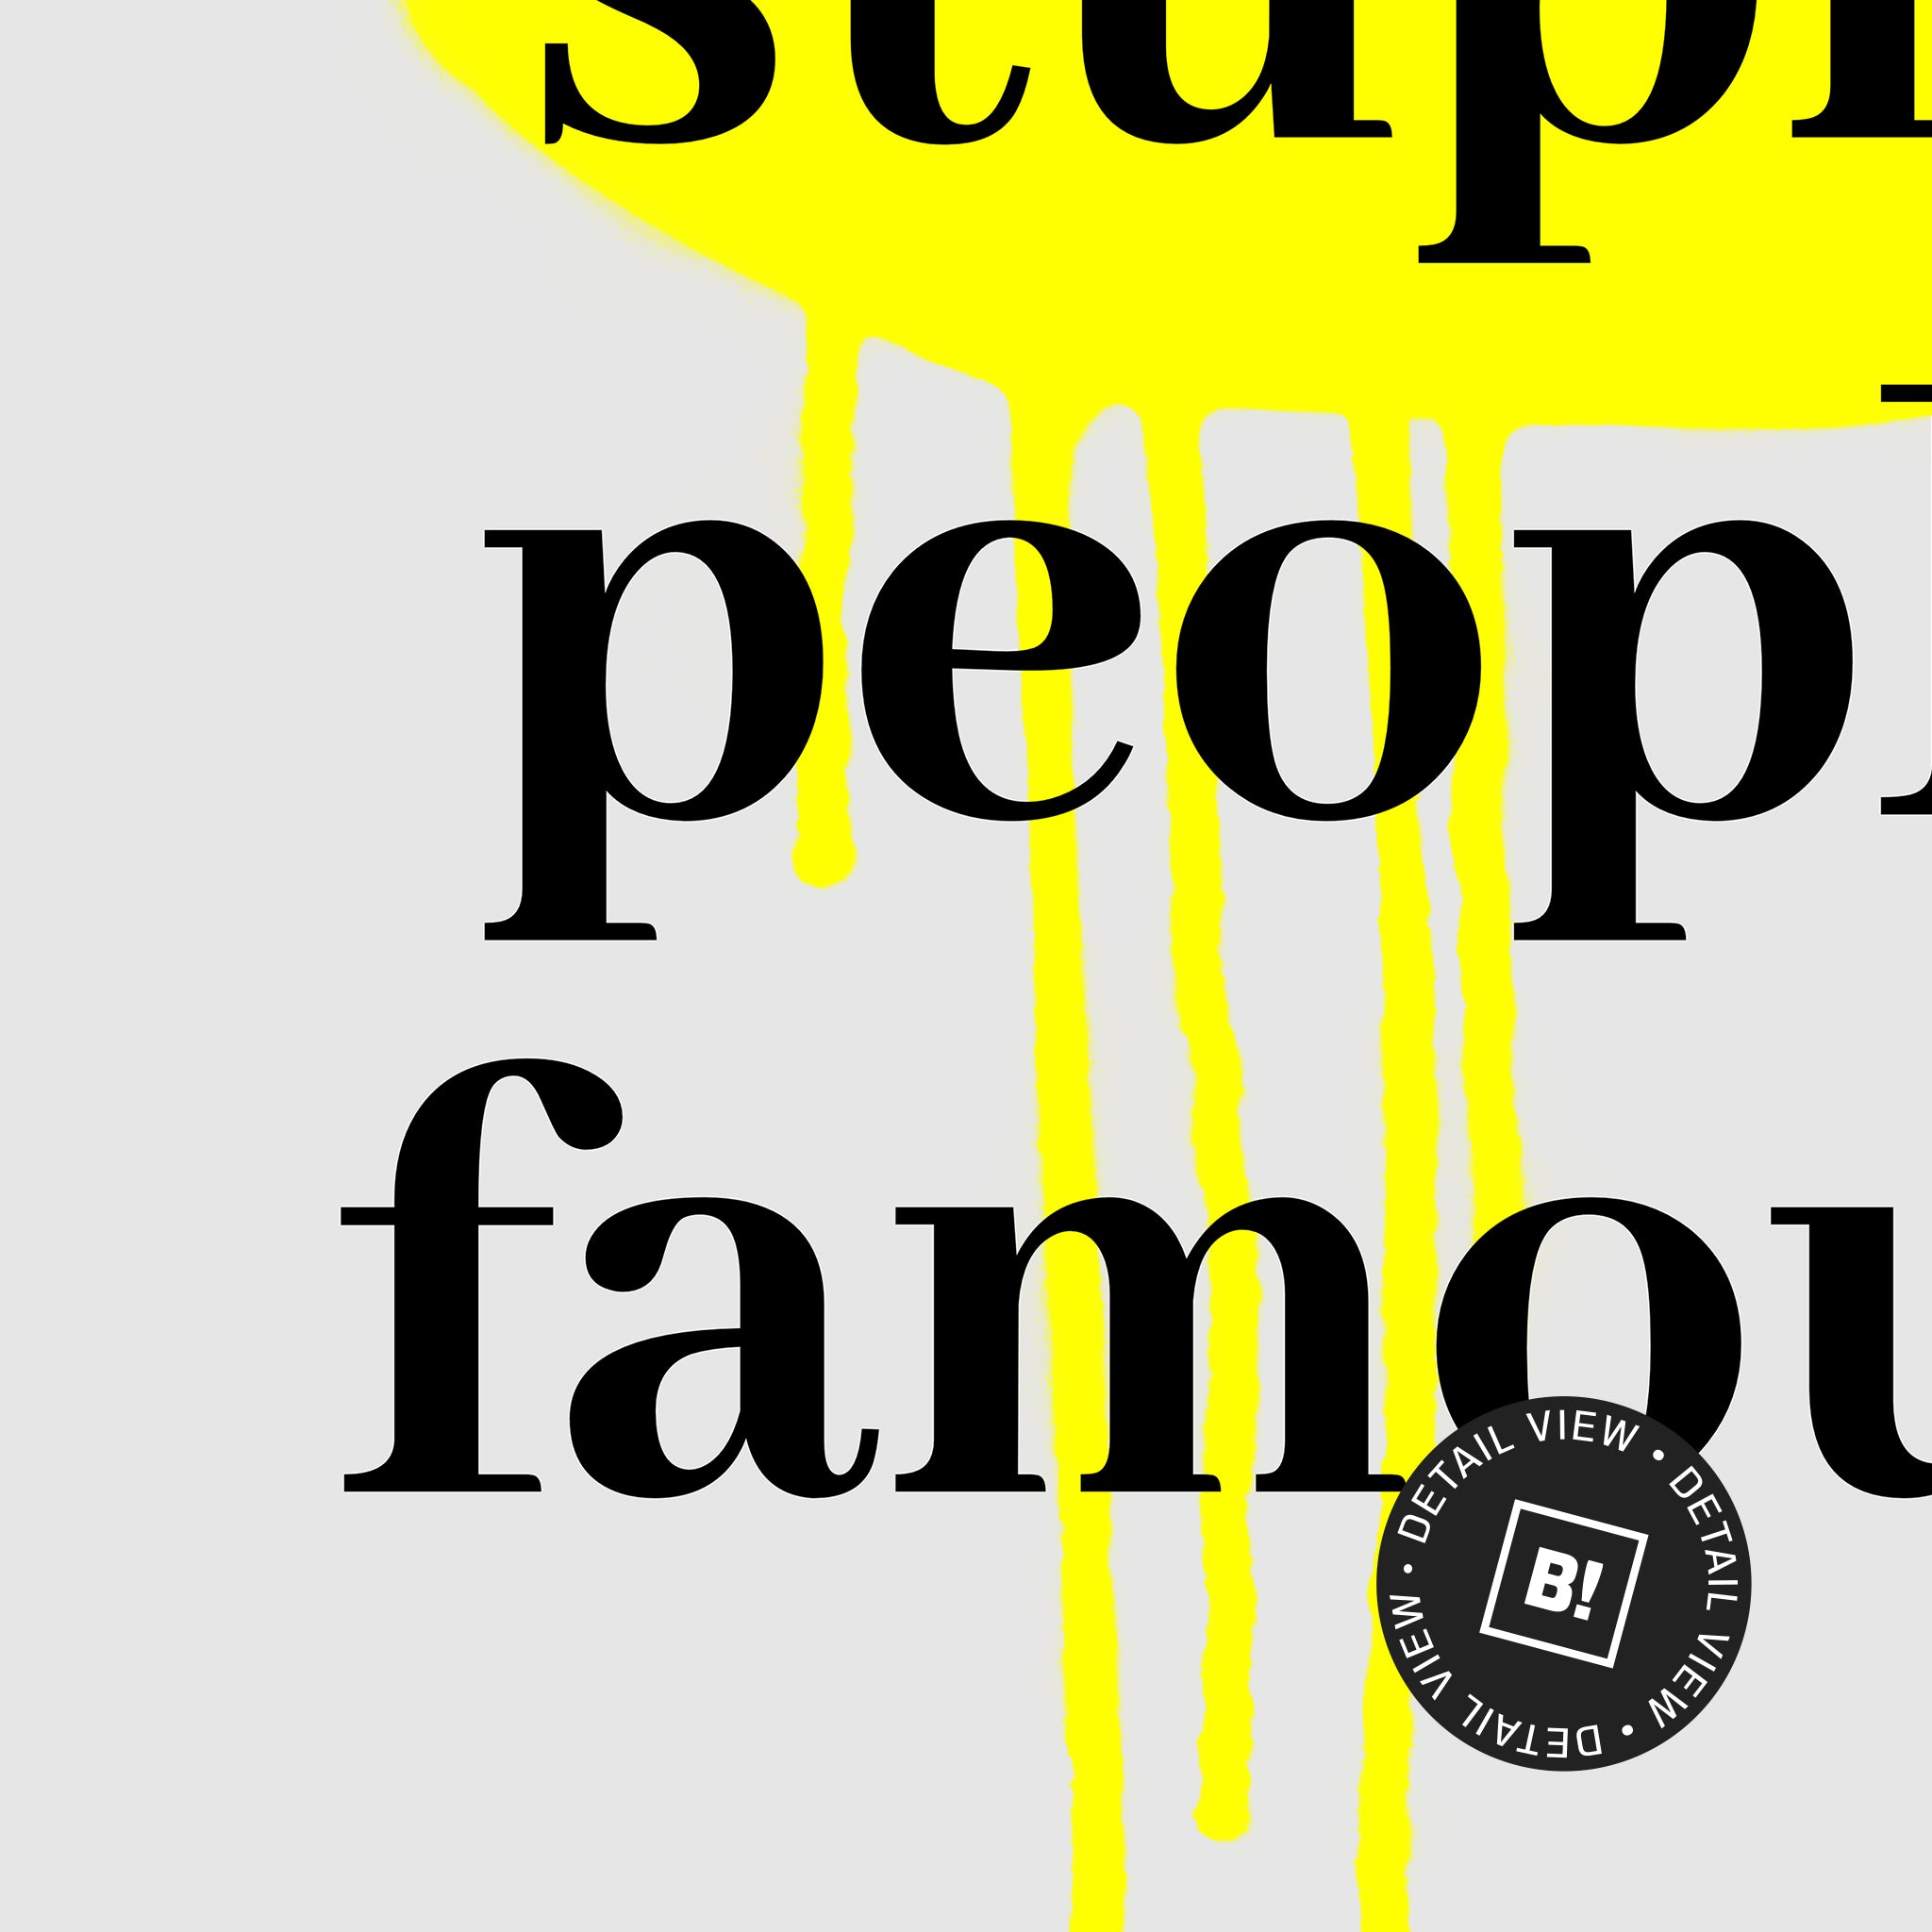 A detail view of our "Stop making stupid people famous" quote art print! This artwork was printed using the giclée process on archival acid-free paper and shows its timeless beauty in every detail.